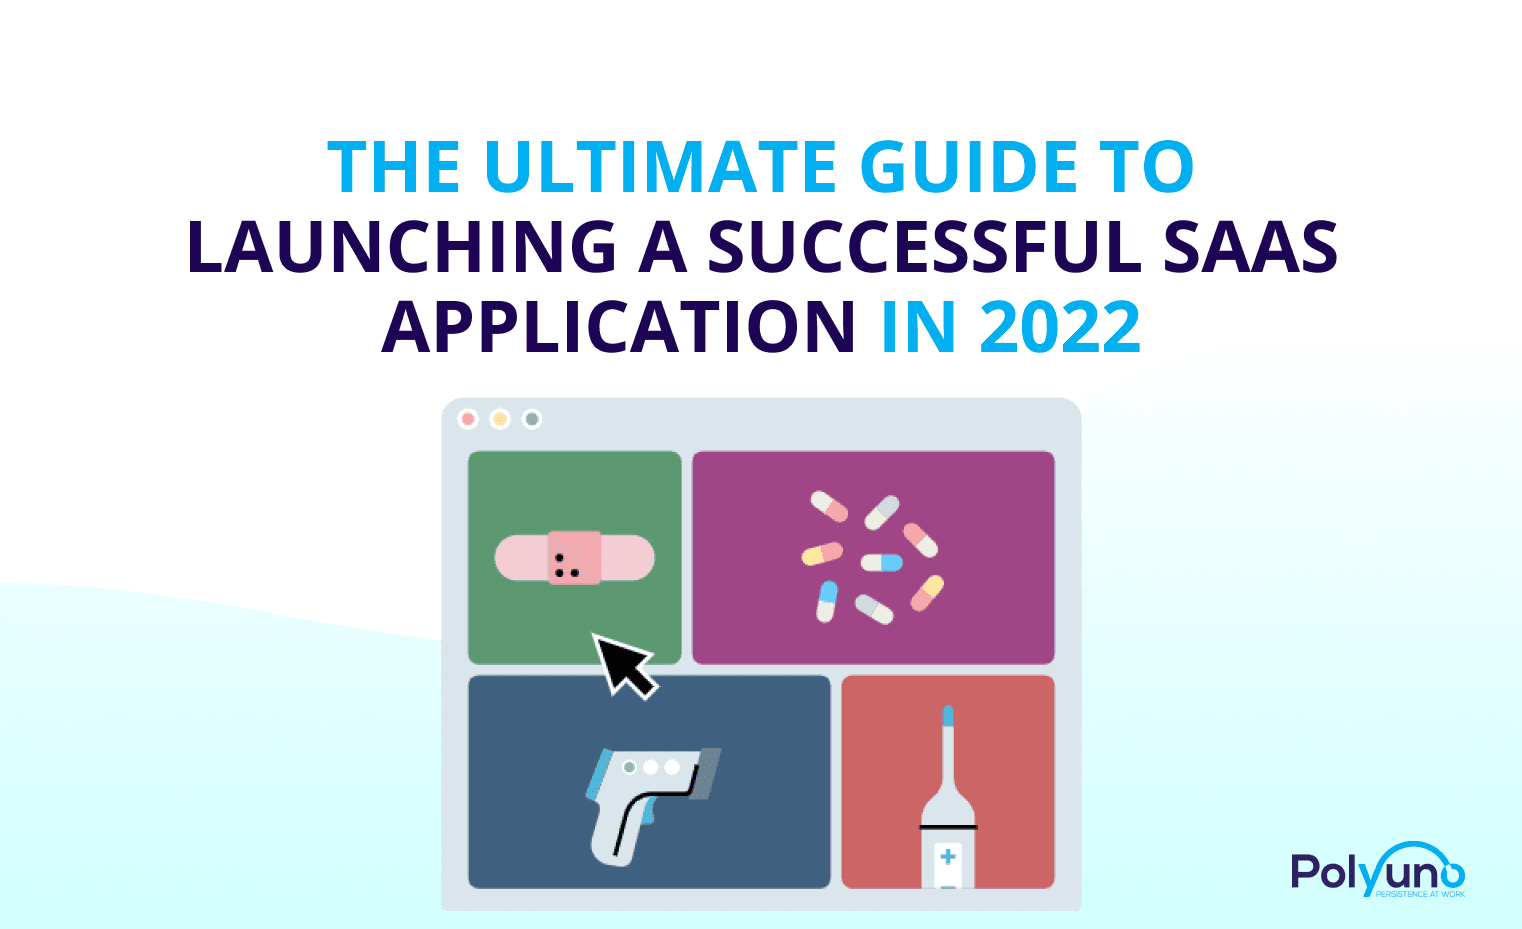 The Ultimate Guide To Launching A Successful SaaS Application in 2022